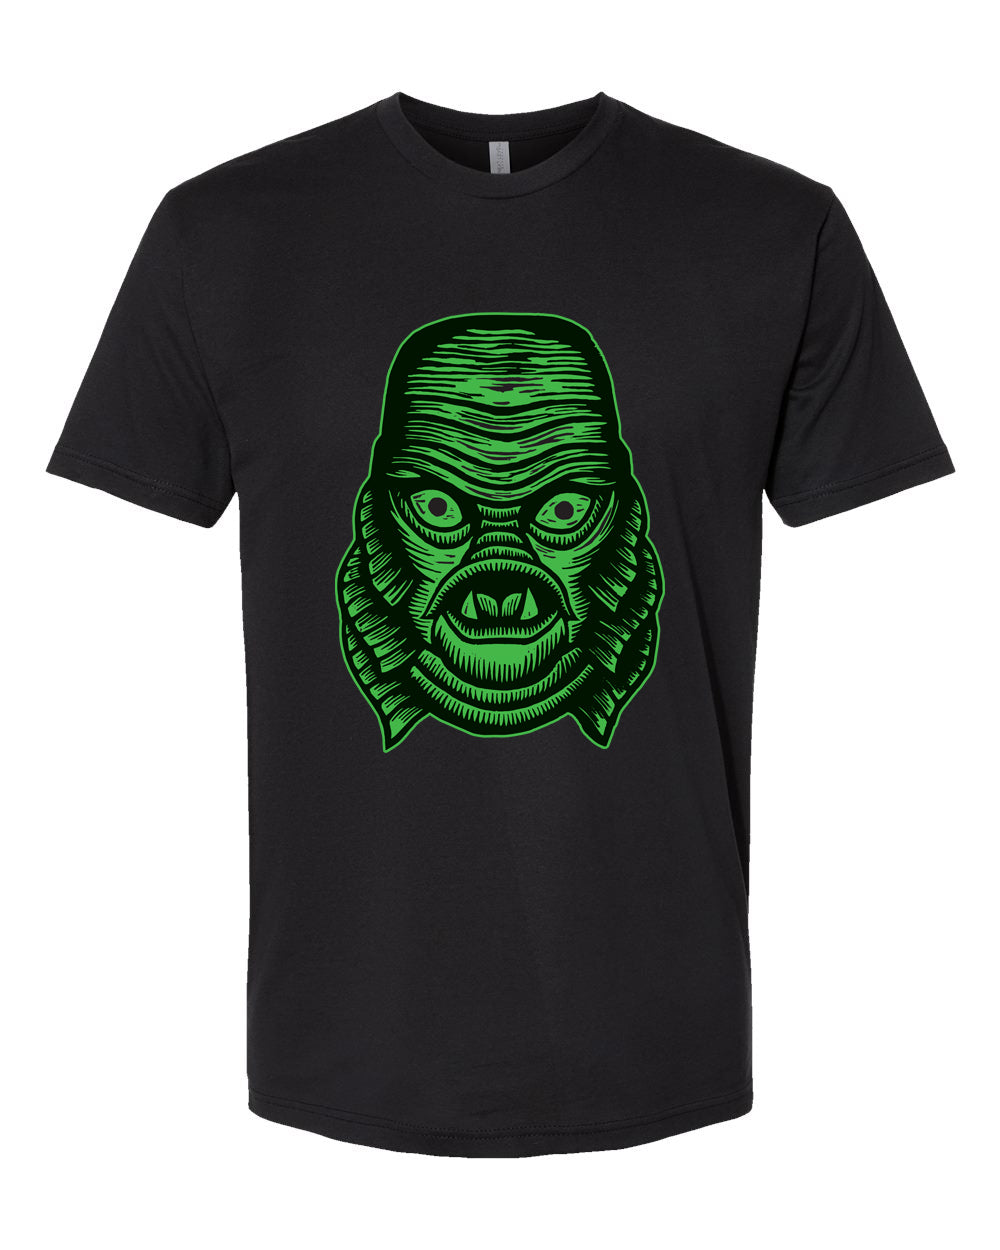 Creature from the Black Lagoon Head Graphic Black T-shirt